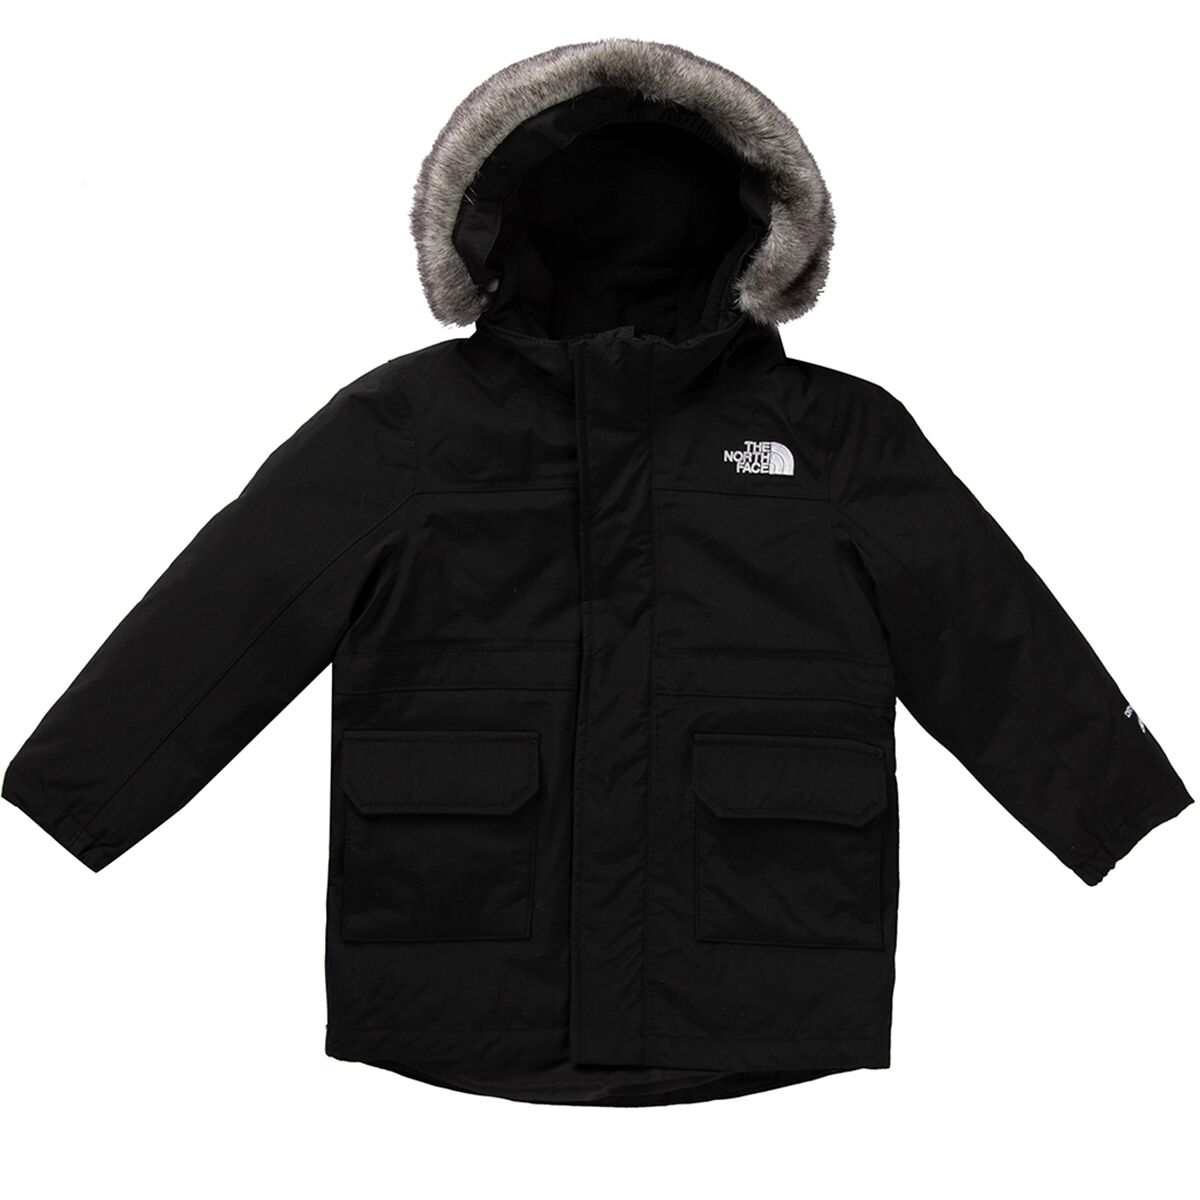 The North Face Arctic Parka - Toddlers'